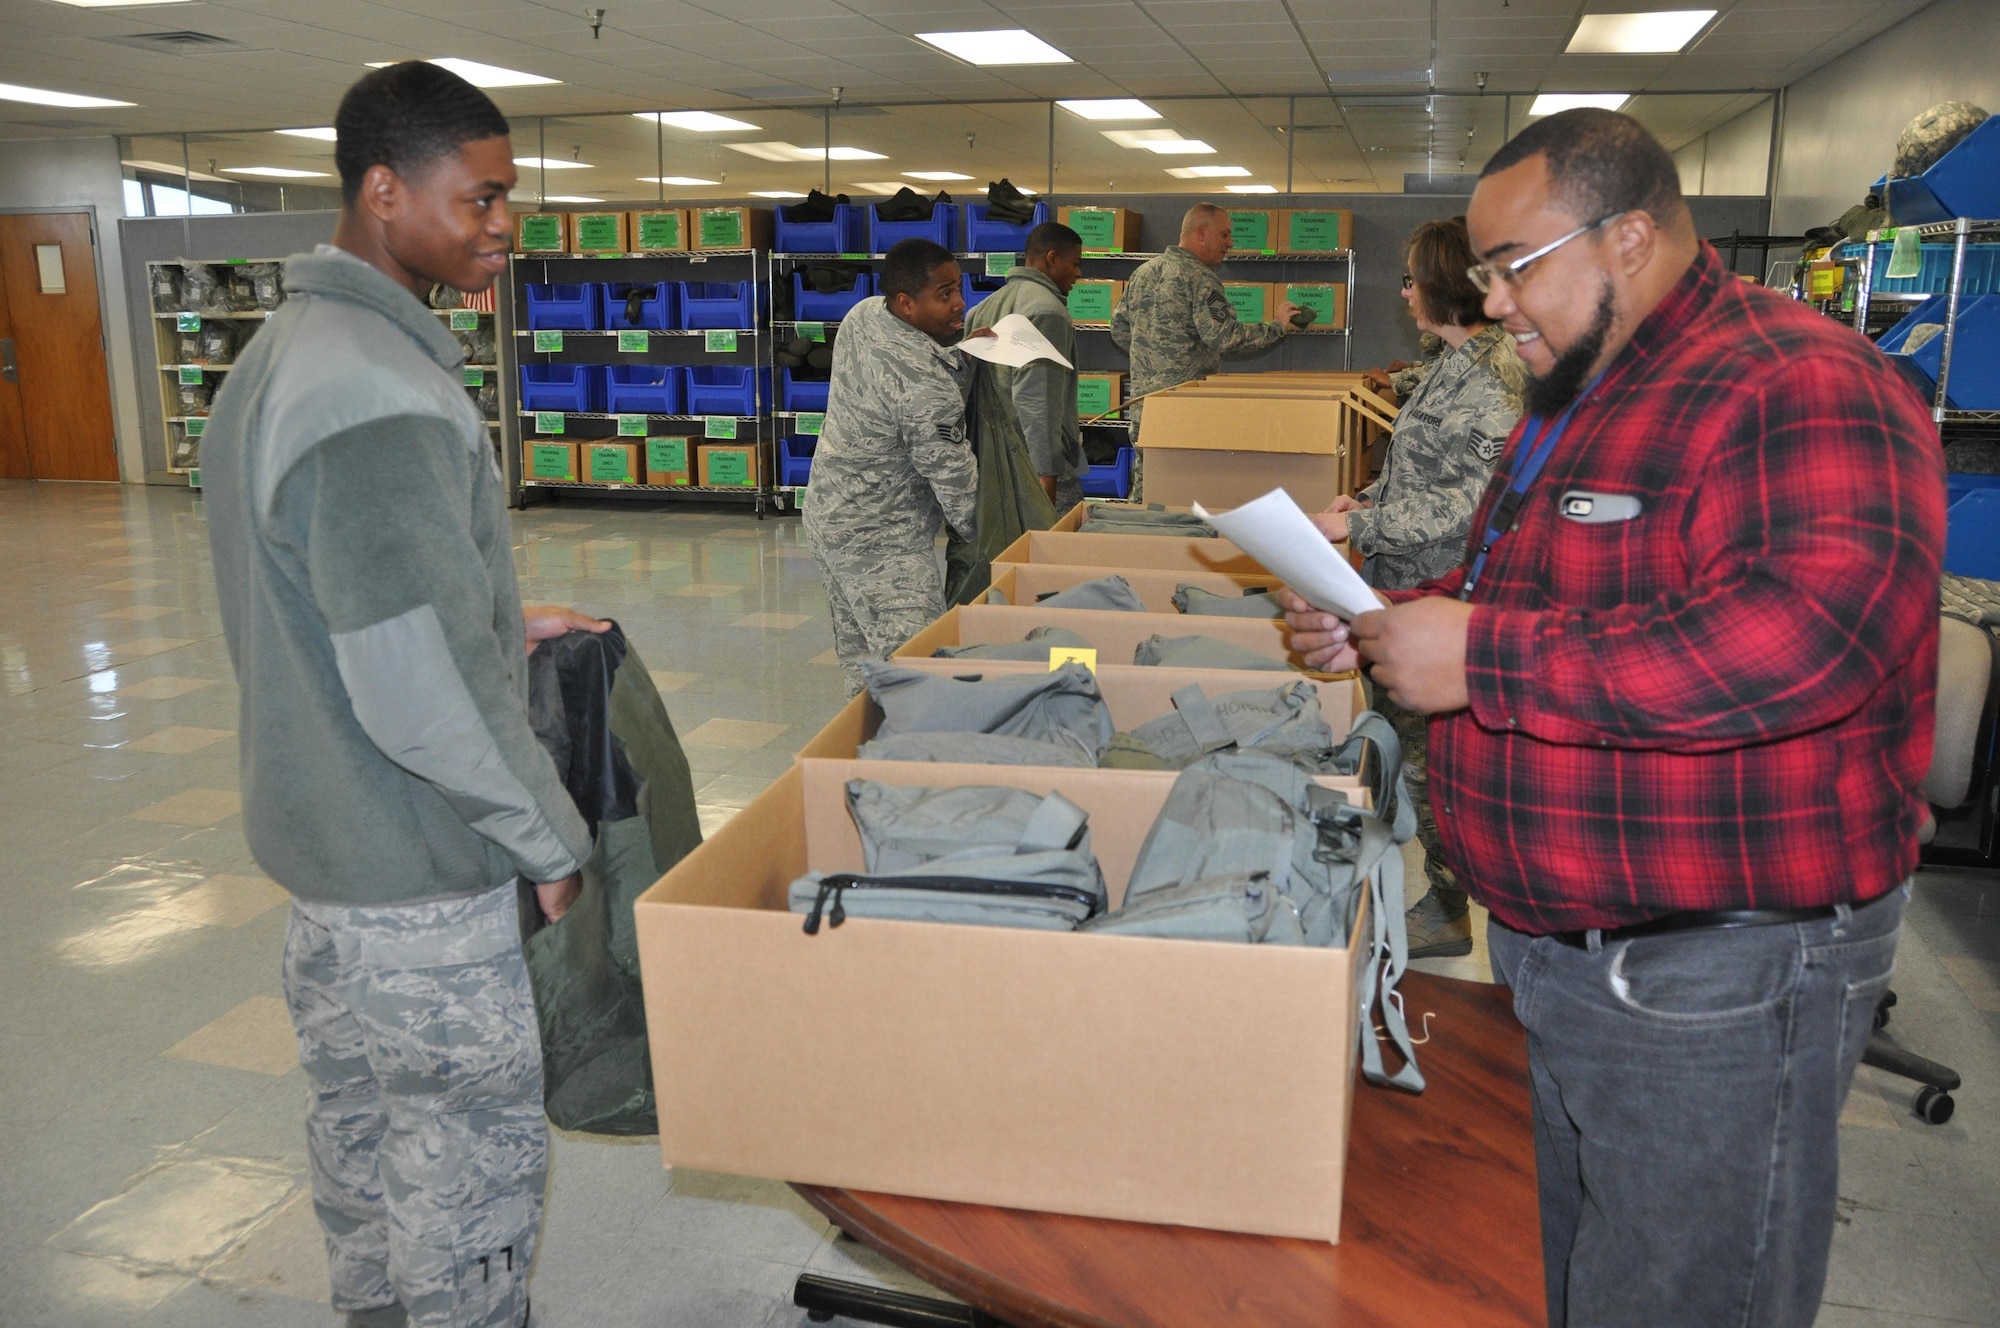 Airmen from the 908th Airlift Wing’s Logistics Readiness Squadron partnered with members of the 42nd Airbase Wing’s LRS to issue supplies and equipment to 908th members slated to deploy this year Jan. 8 at Maxwell Air Force Base. The partnership between the 908th and the 42nd is vital to mission success on Maxwell. (U.S. Air Force photo by Bradley J. Clark)